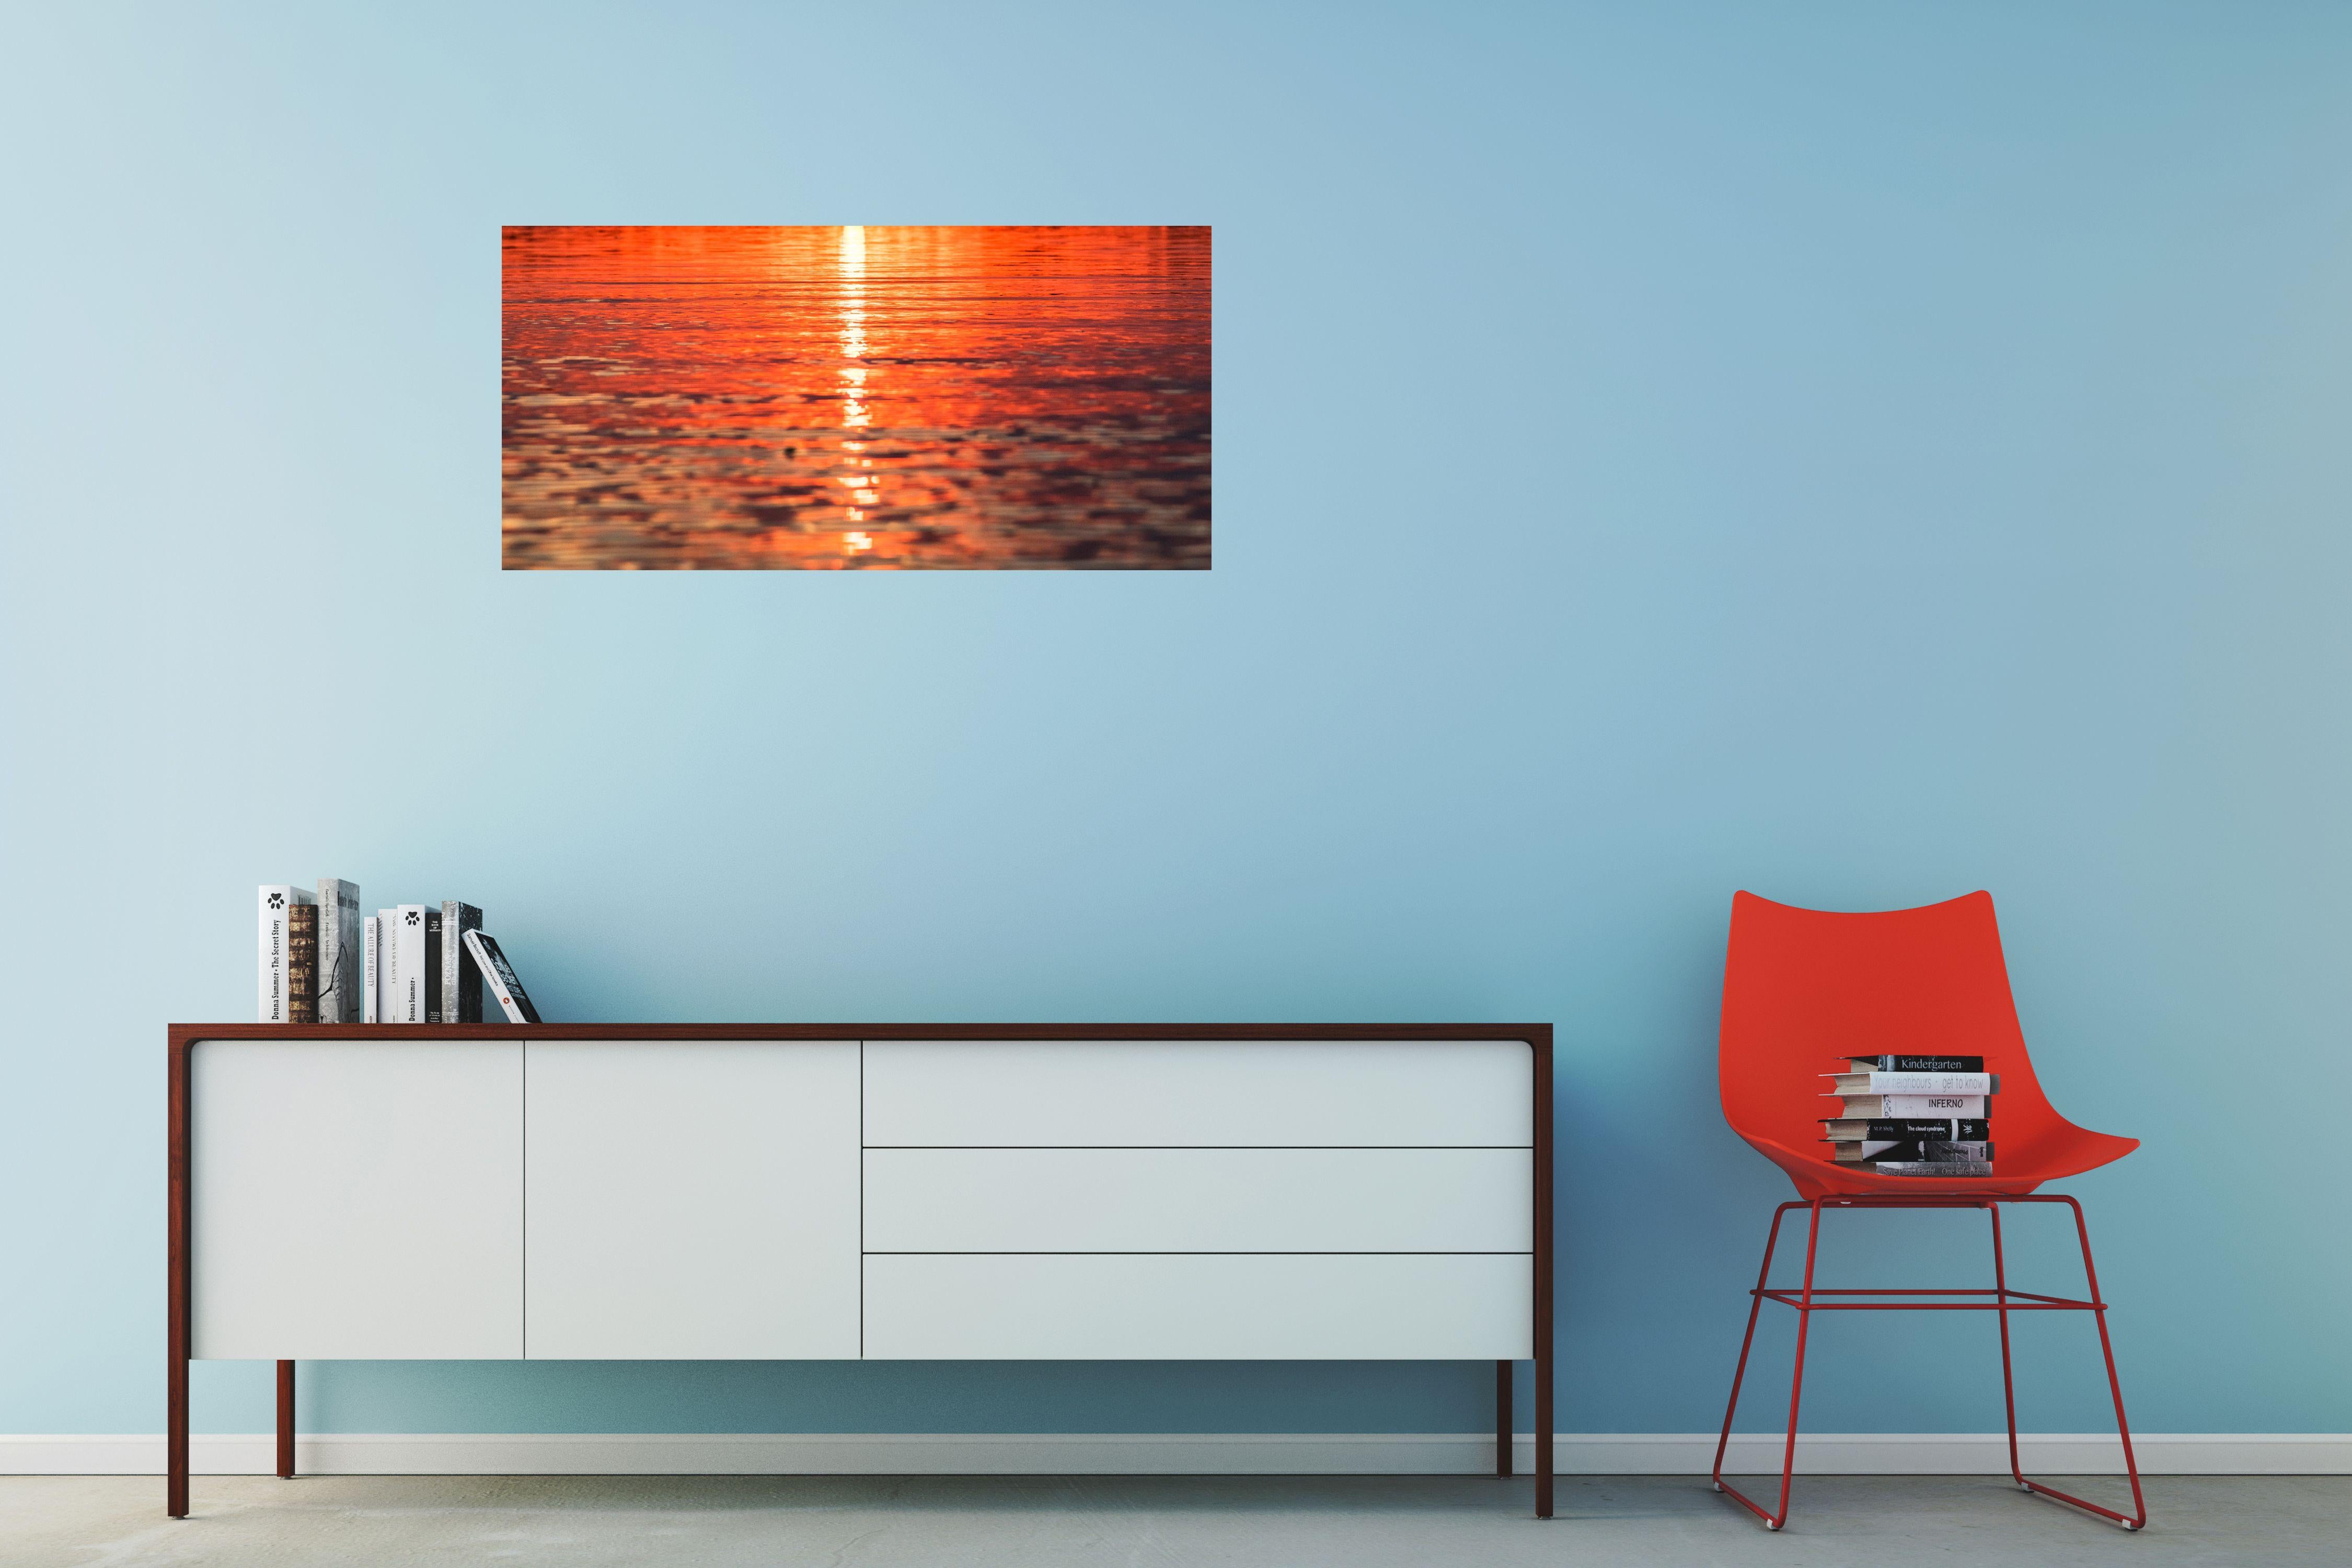 One of a series of images where Andrew has used a paddle board to capture a minimalist colour artwork. Laying down on the board created a unique perspective of the sea. This wonderful vibrant colour print shows that nature is the best artist